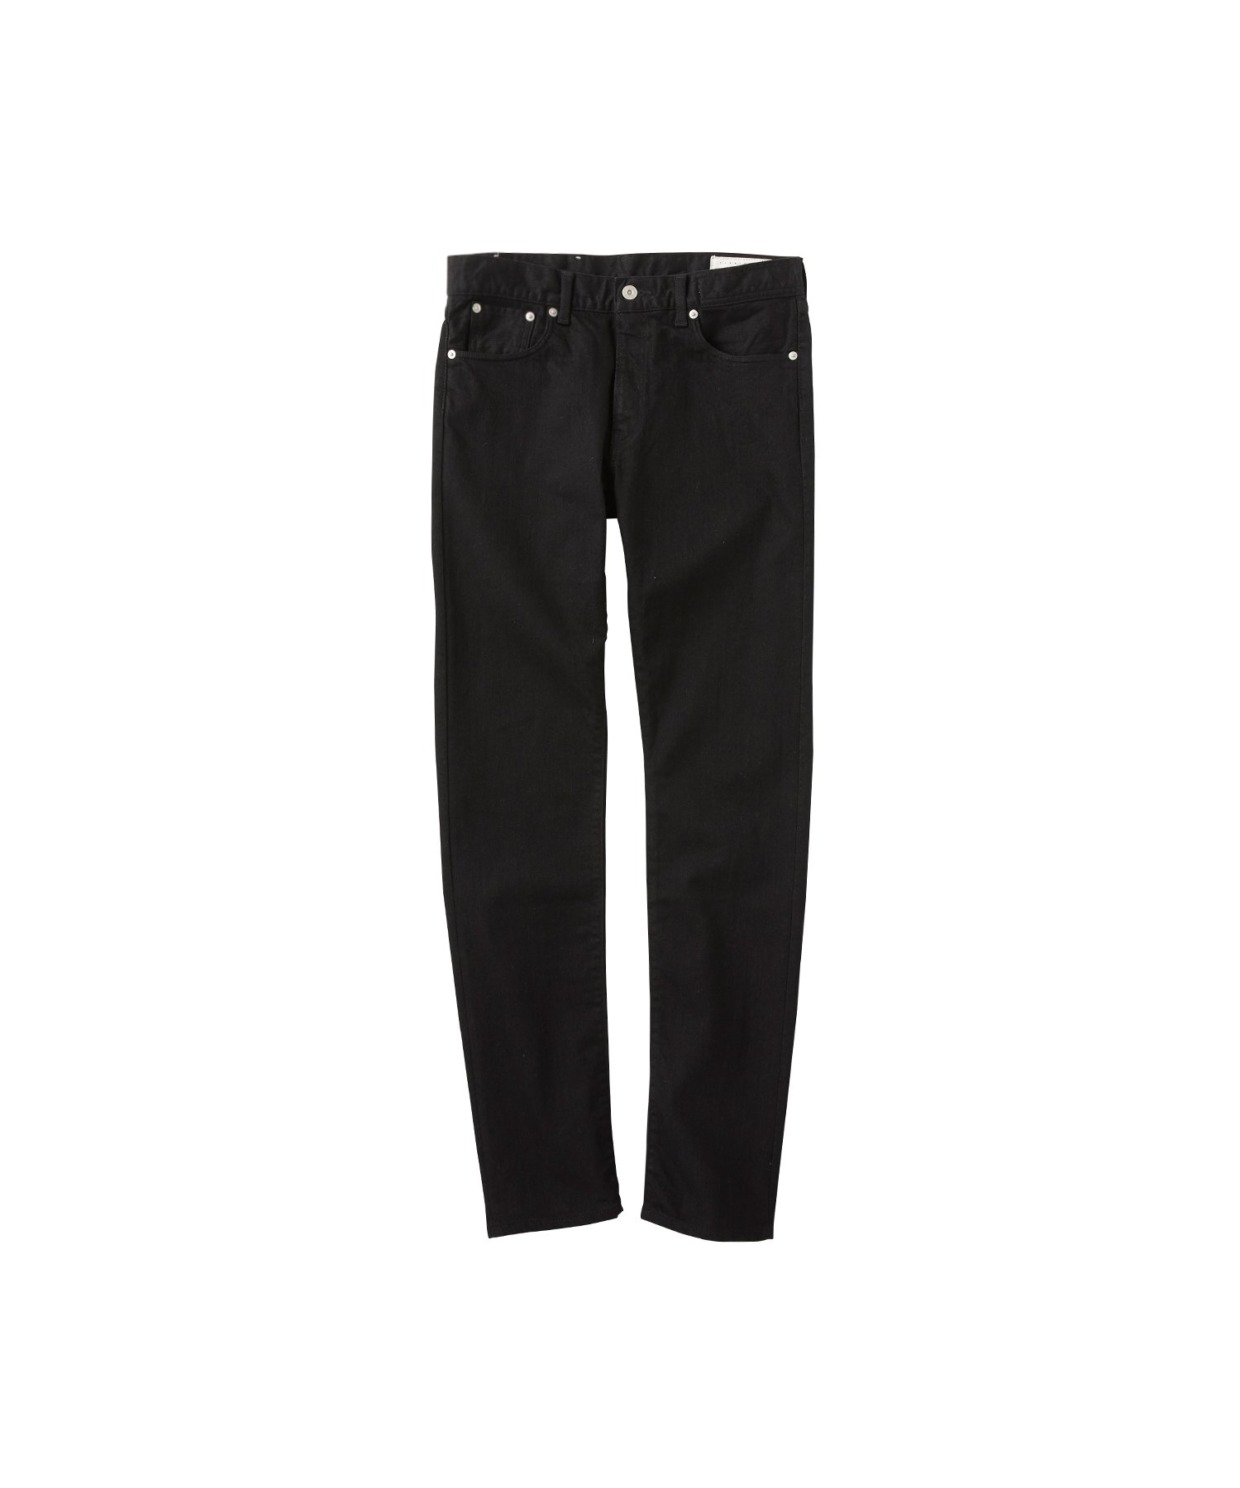 S-SELECTION|DIAMANTE WOMENS BLACK ONE WASH MONSTER STRETCH